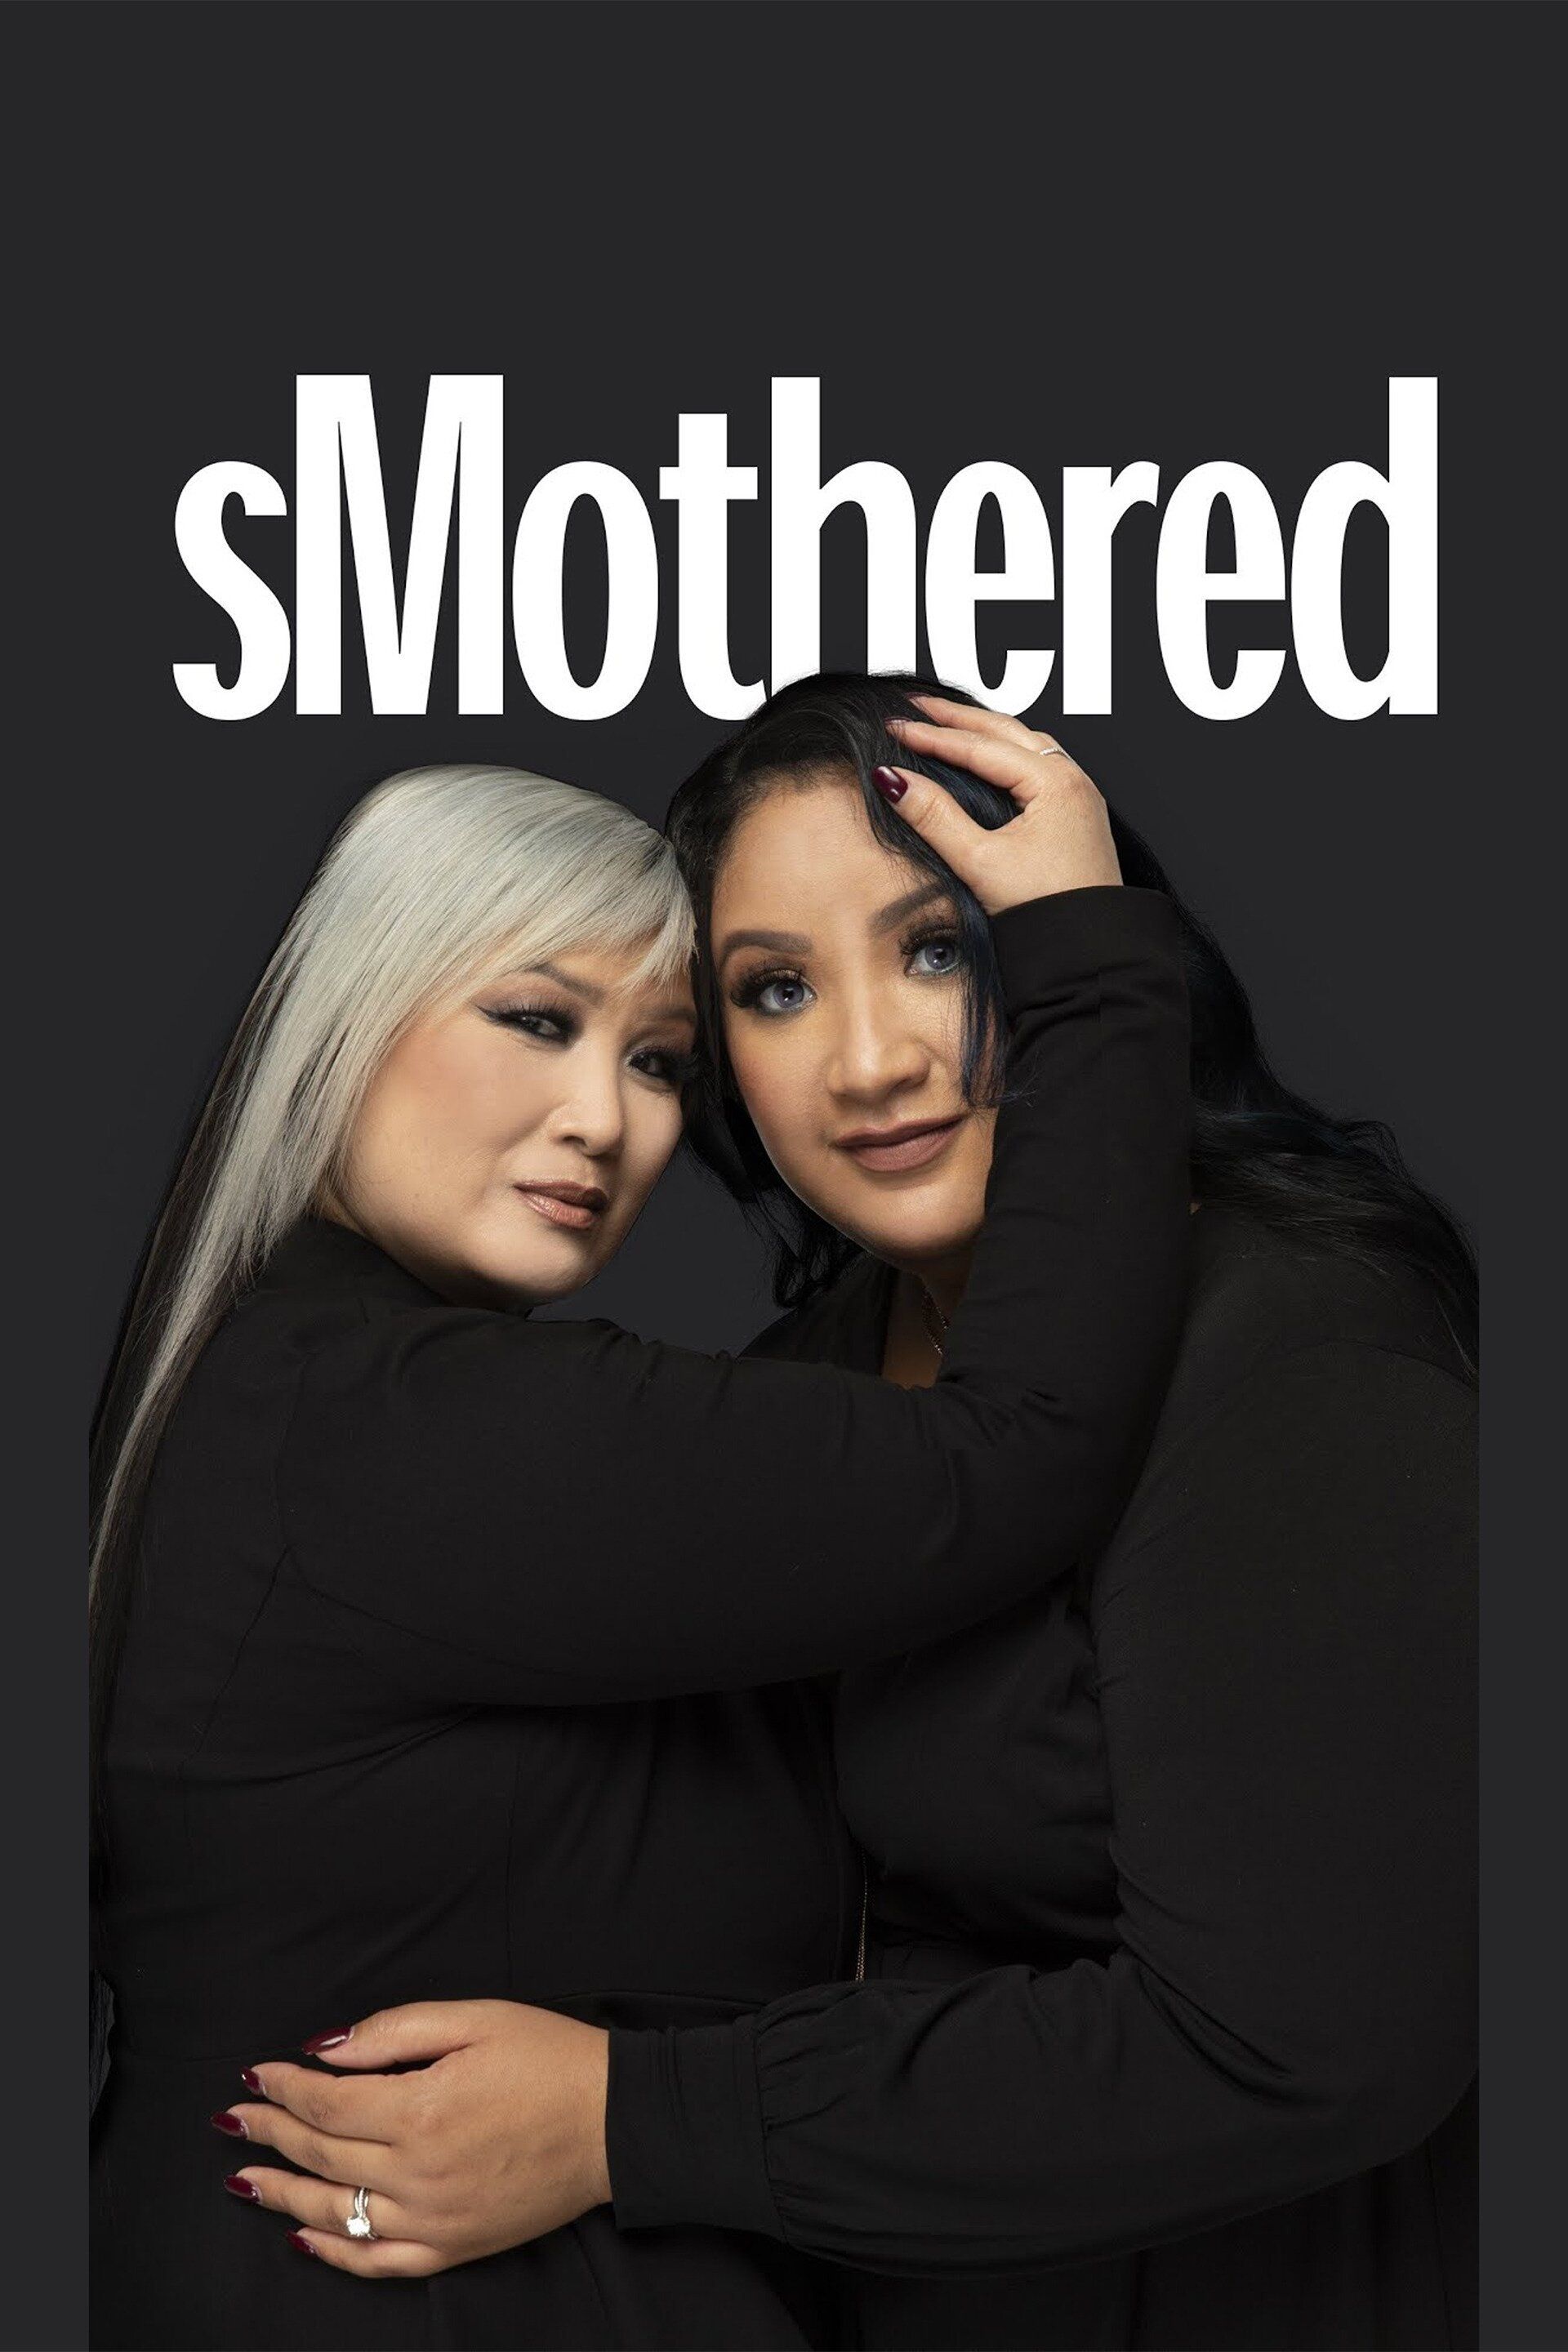 Watch Smothered